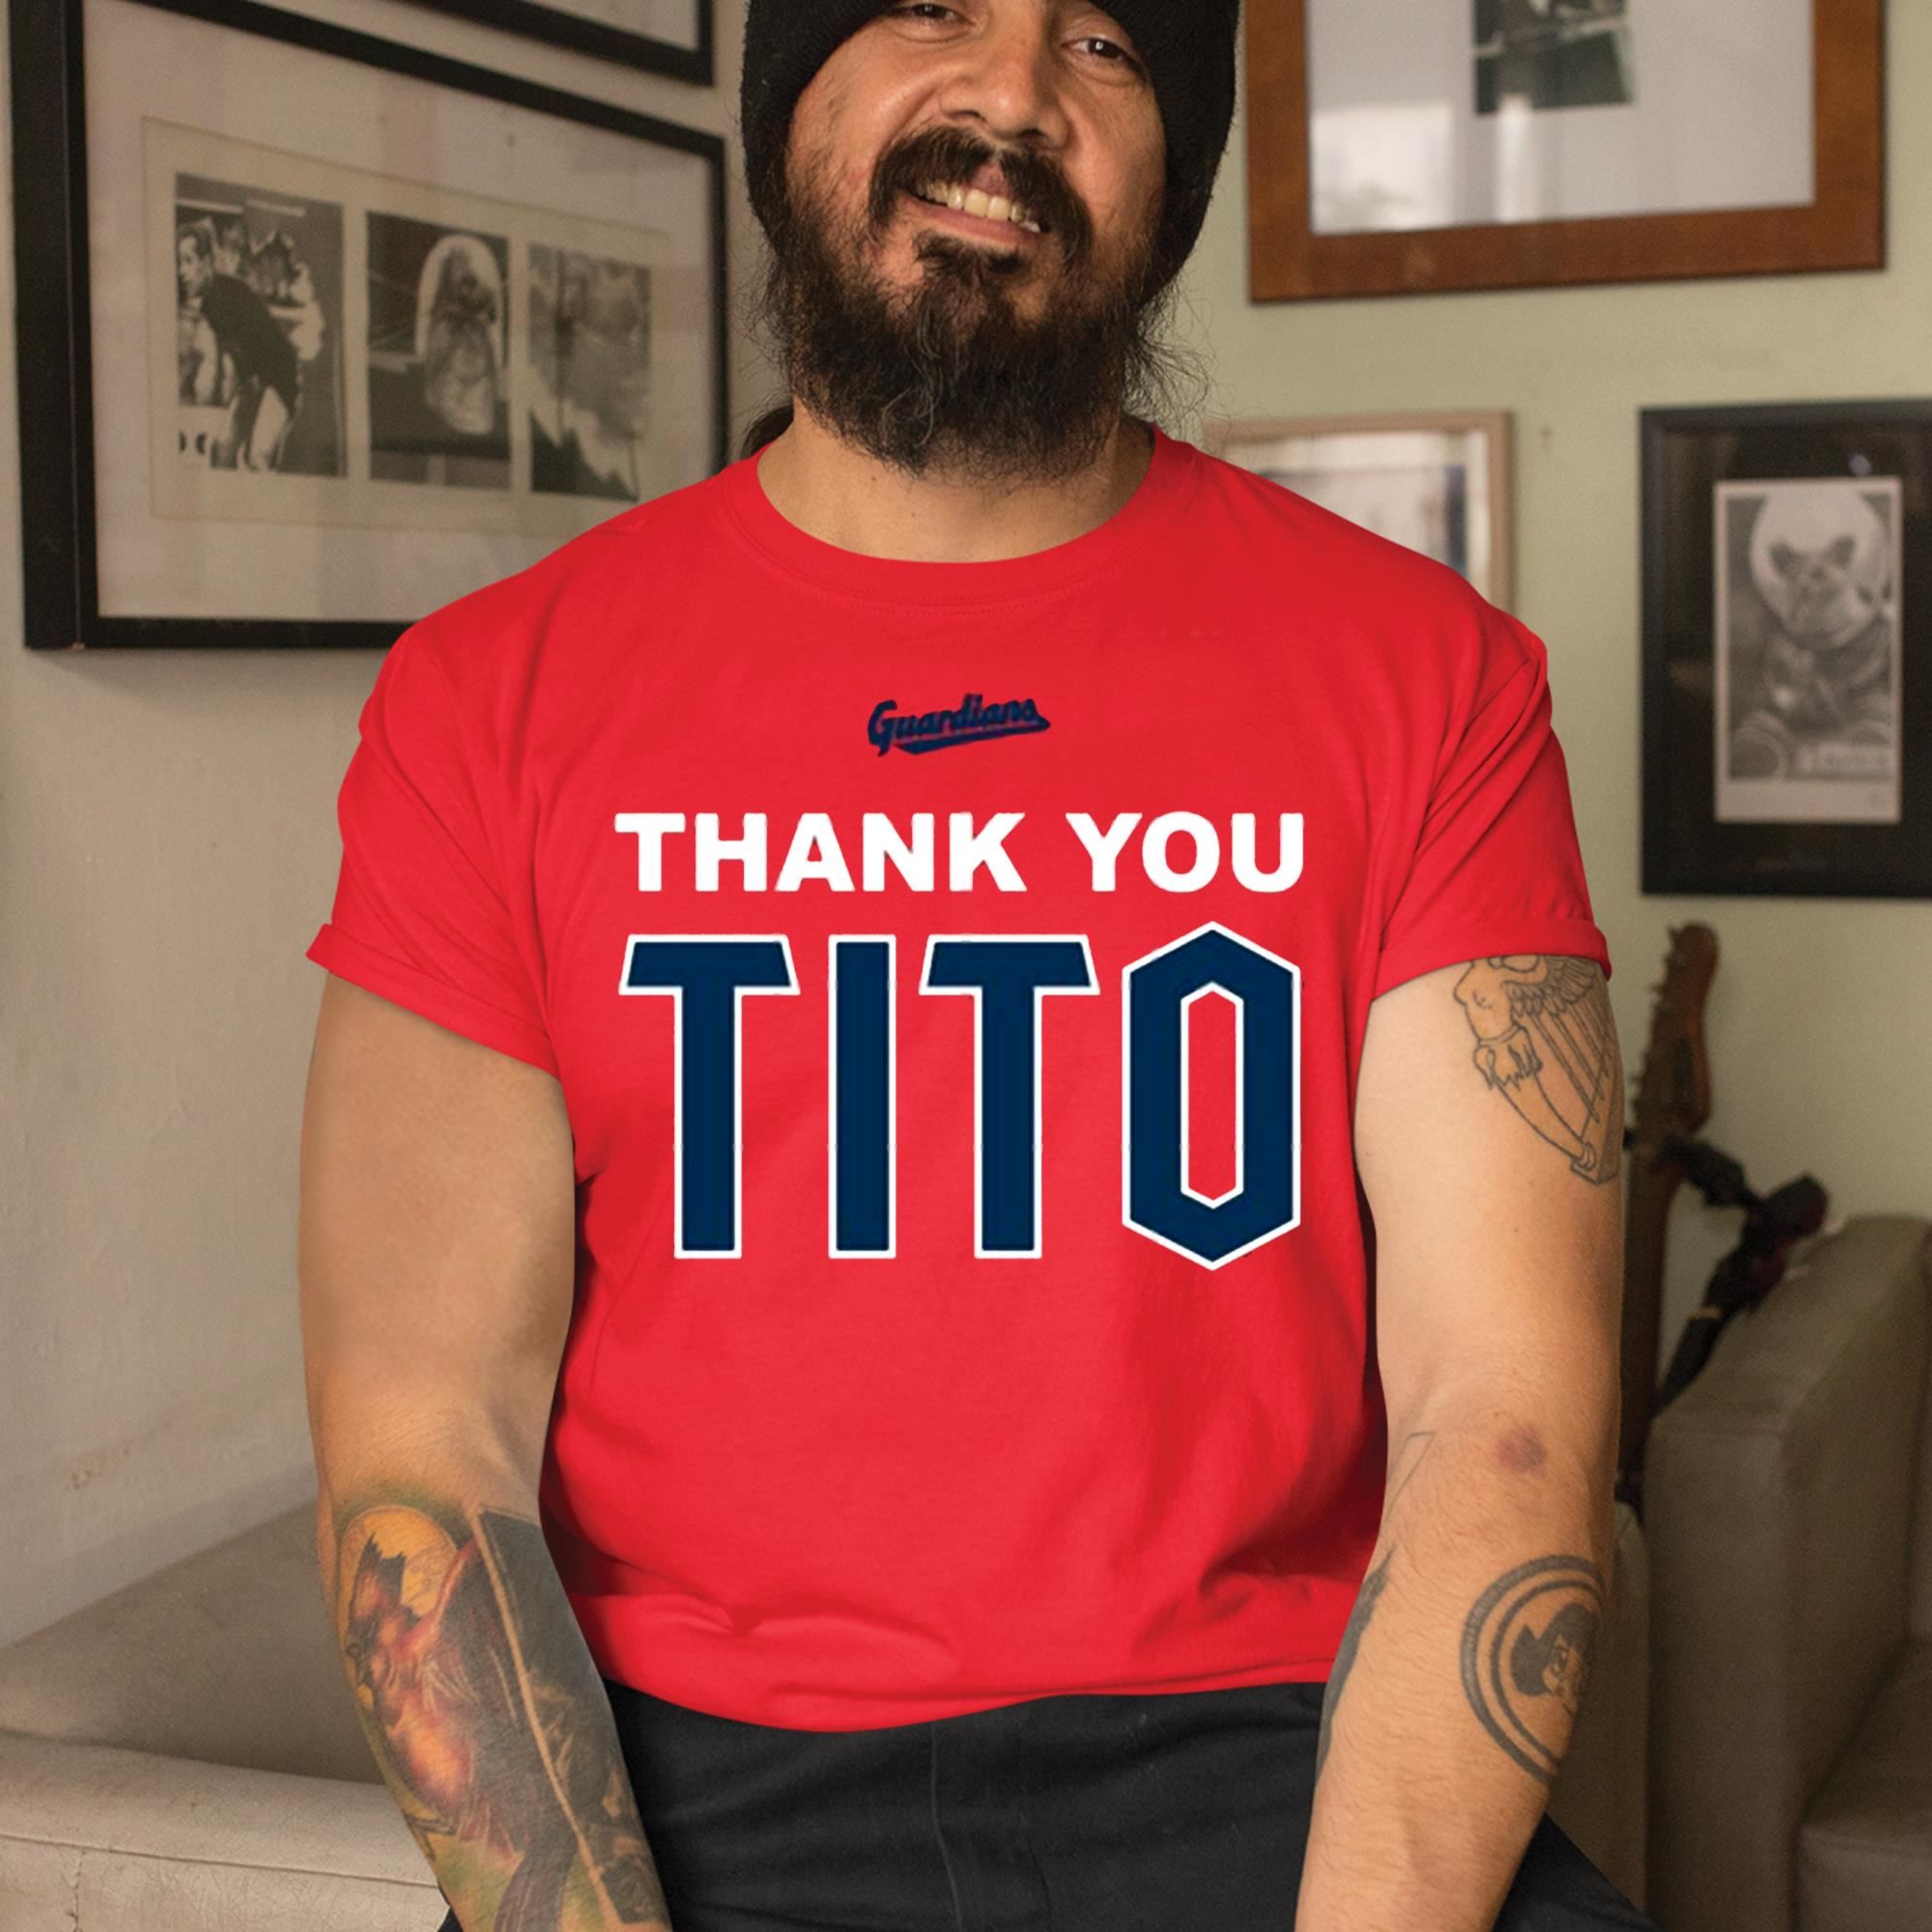 Official thanking Terry Francona Shirt Tito's Farewell Shirt Cleveland  Indians Thank You Shirt, hoodie, sweatshirt for men and women